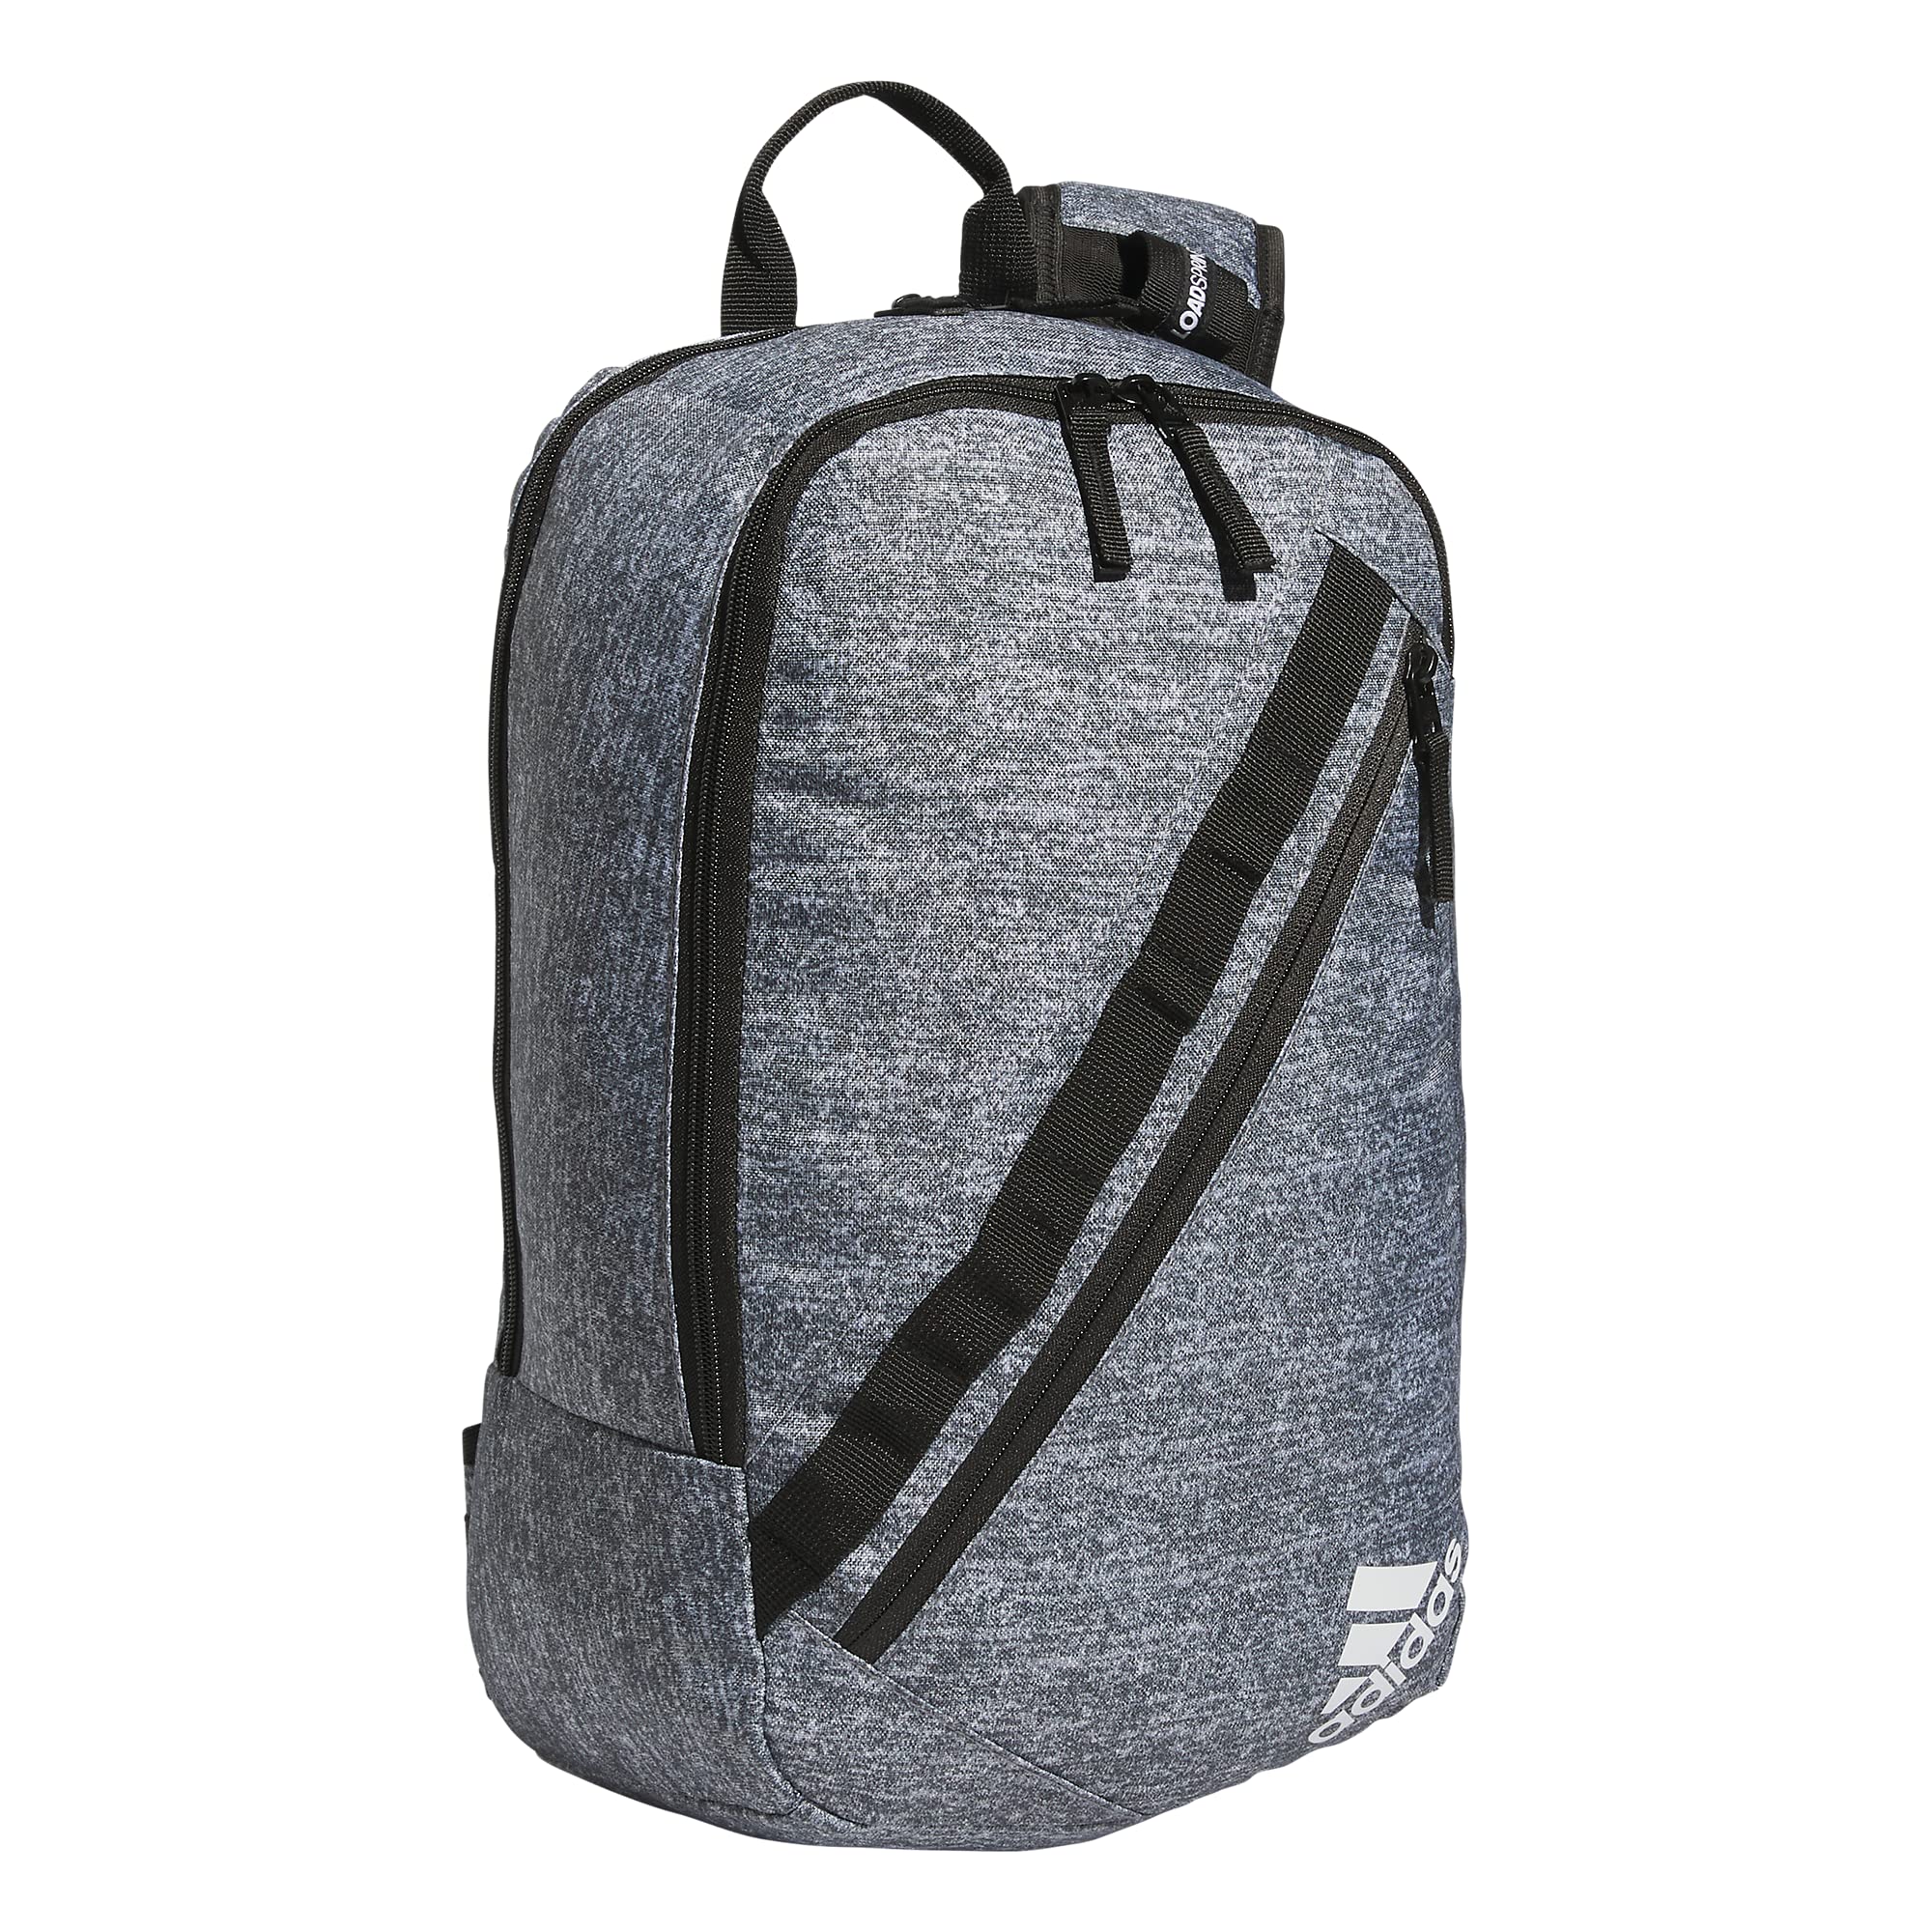 adidas Prime Sling Crossbody Backpack (Jersey Onix Grey) $20.29 + Free Shipping w/ Prime or on $35+